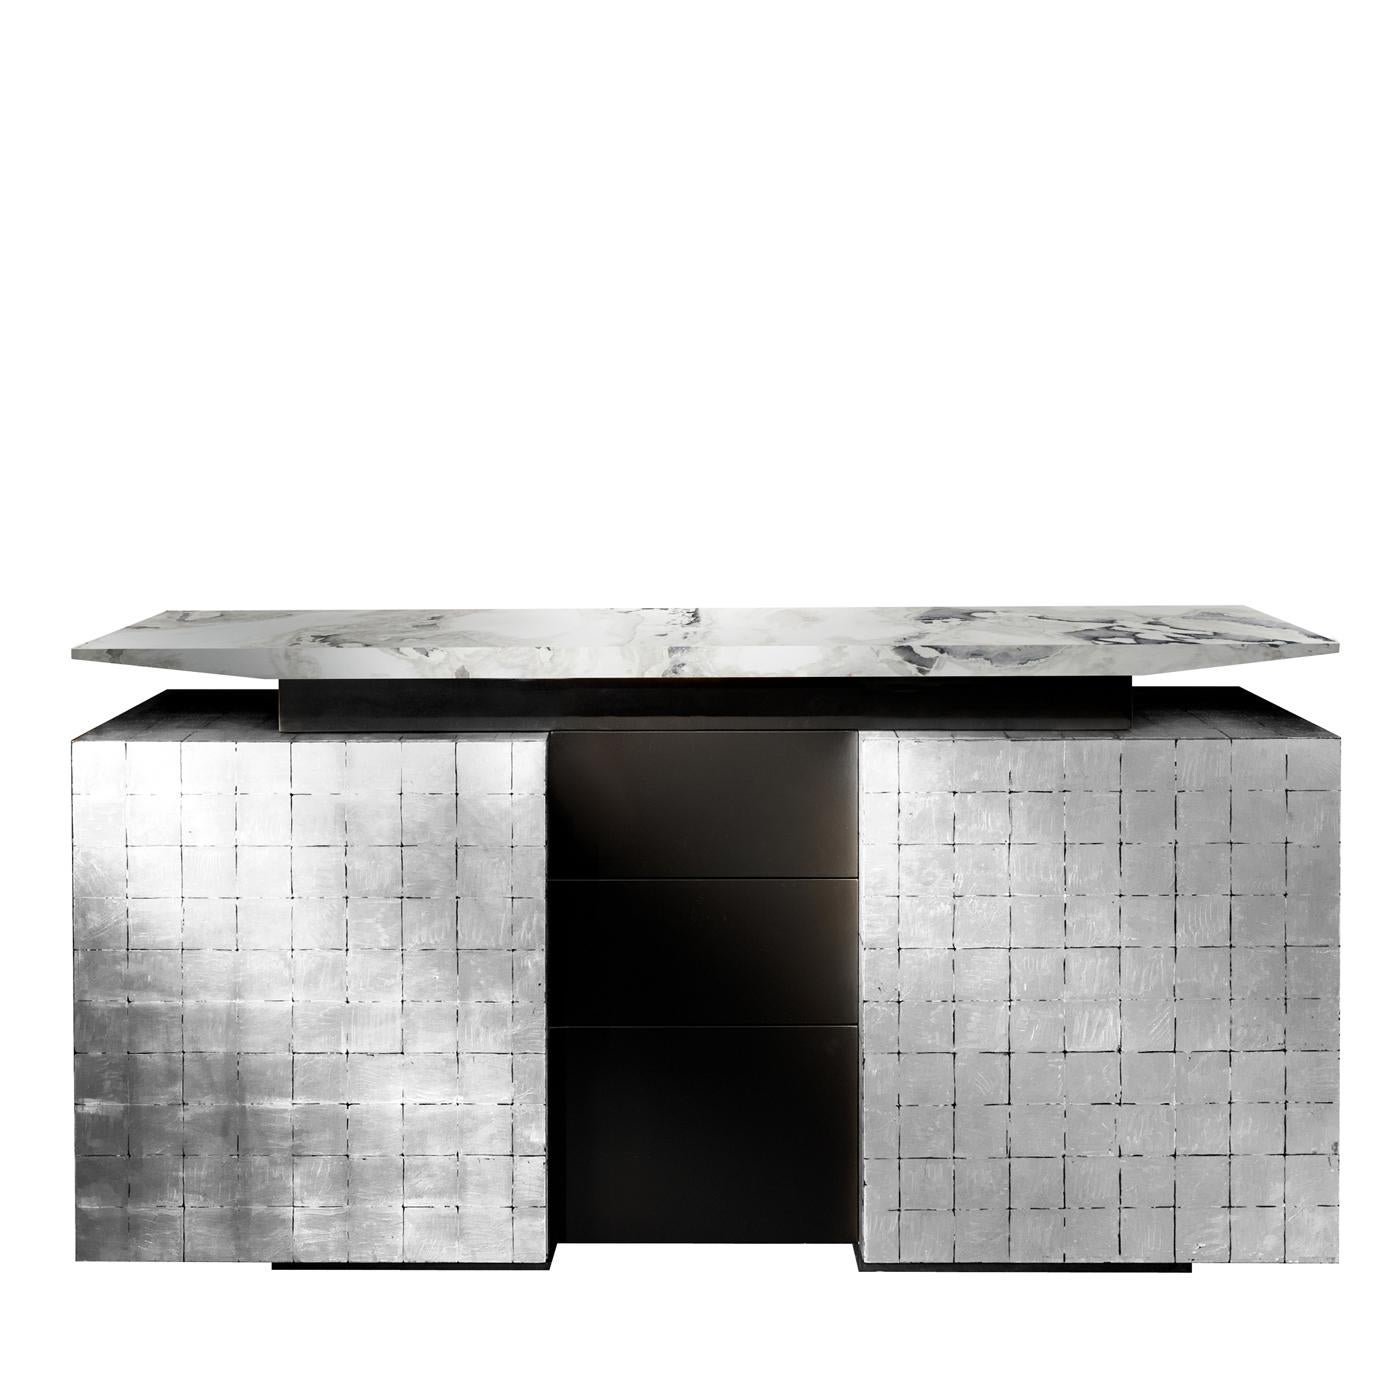 This magnificent sideboard is composed of two silver-finished doors with inner shelves, three middle drawers finished with a matte black polyurethane lacquer, and a splendid top fashioned of Dover white marble. A combination of refined materials,